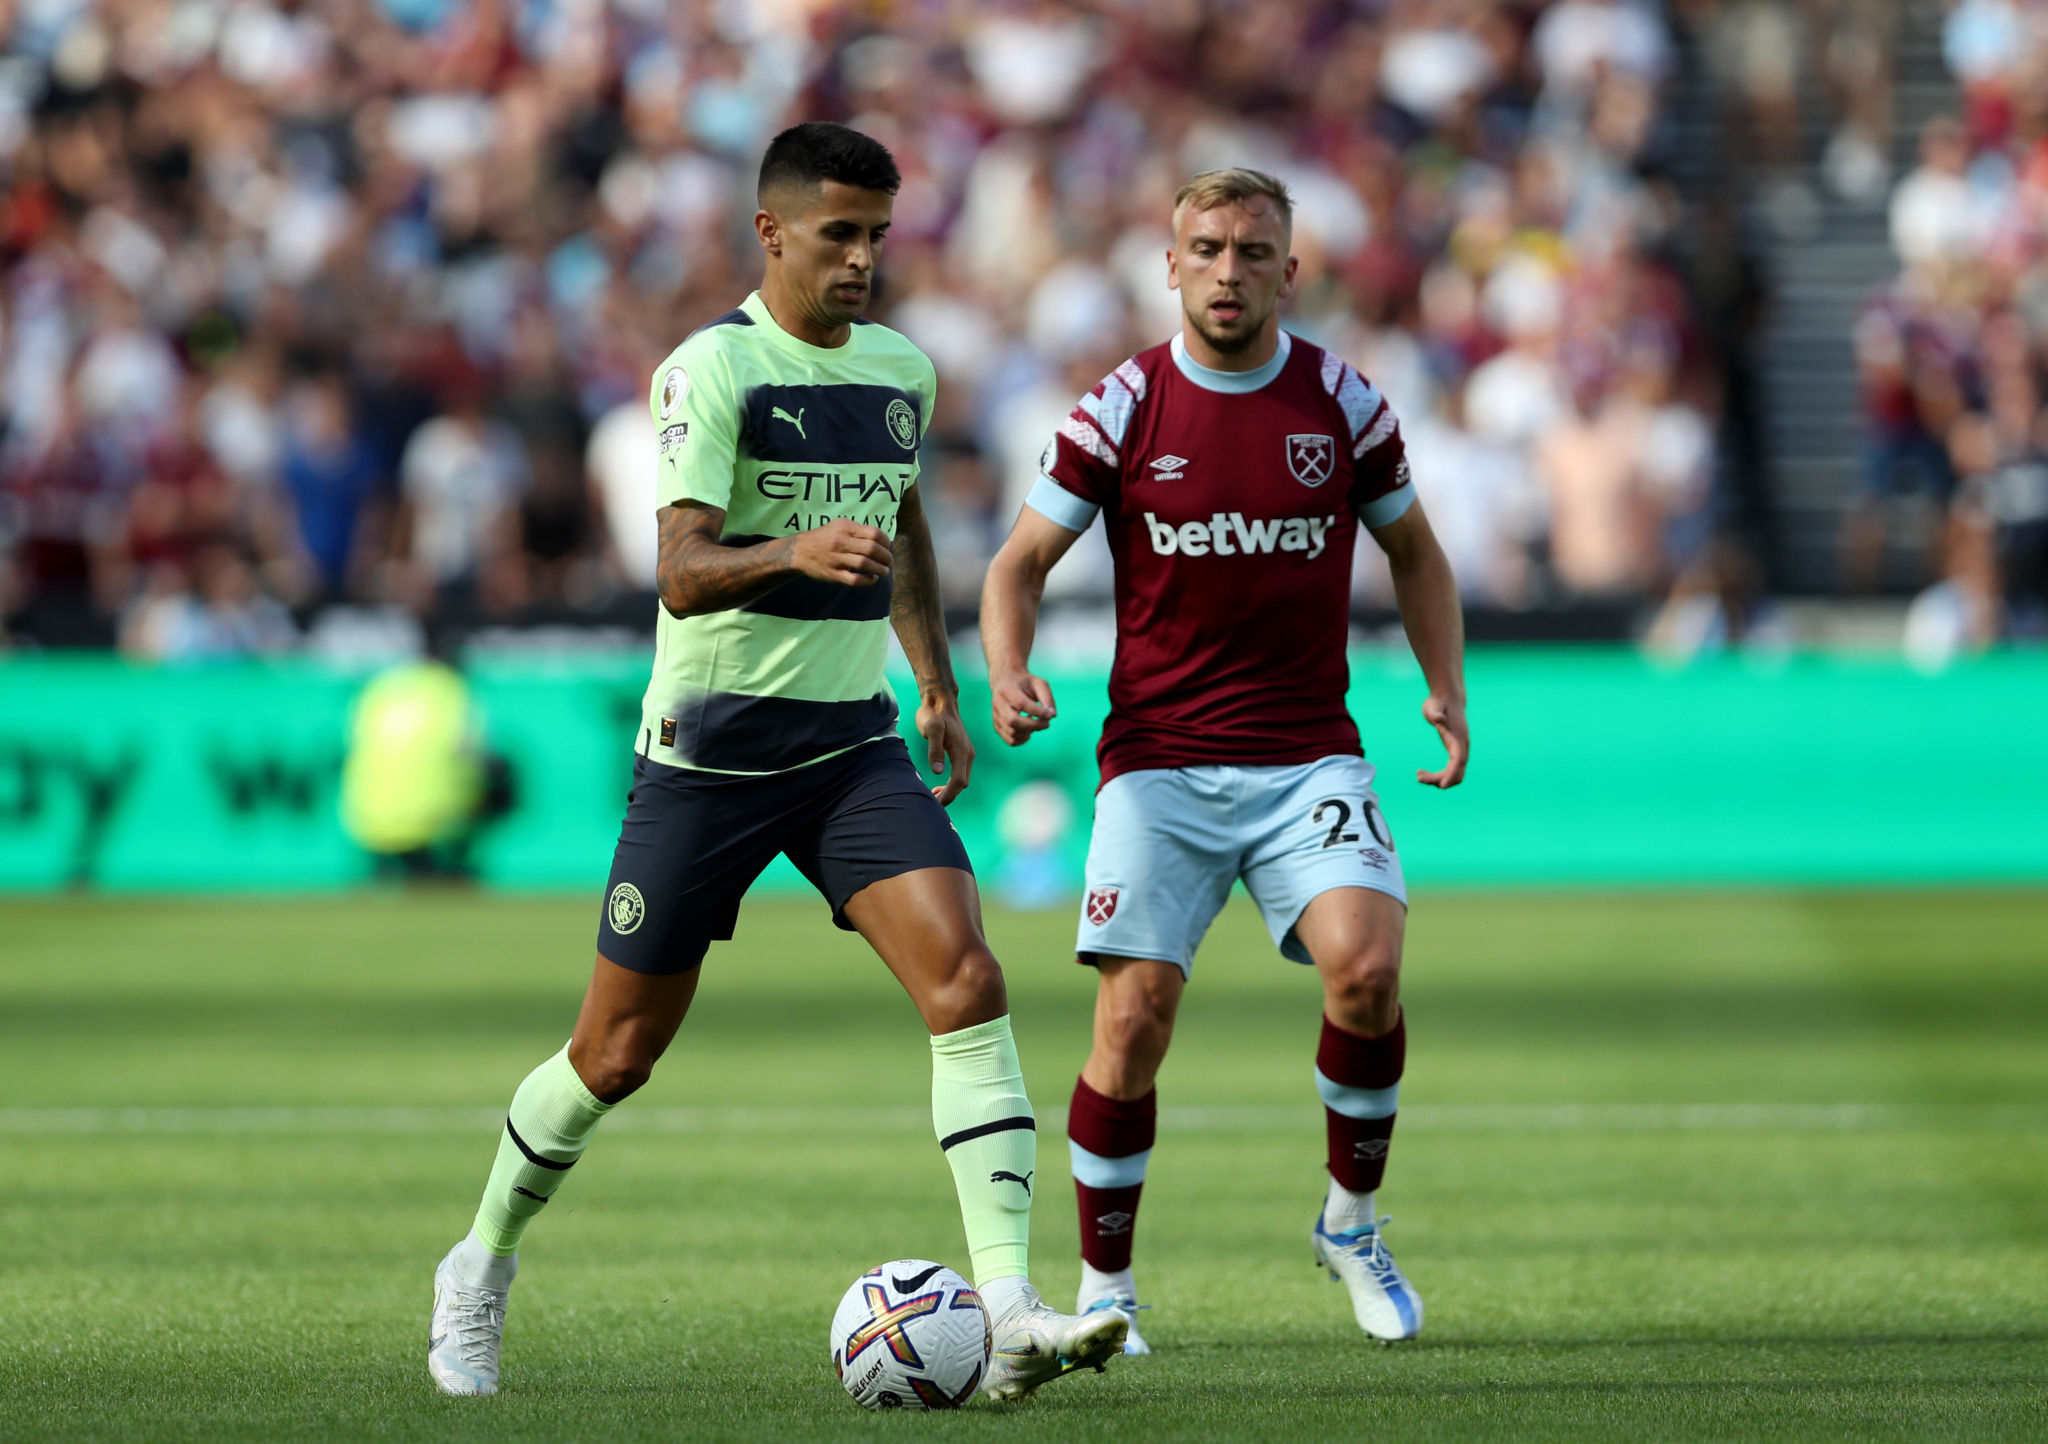 West Ham vs Manchester City LIVE: WHU 0-2 MCI, Erling Haaland shines on debut as Man City claim all three points against the Hammers, Check Manchester City beat West Ham United HIGHLIGHTS